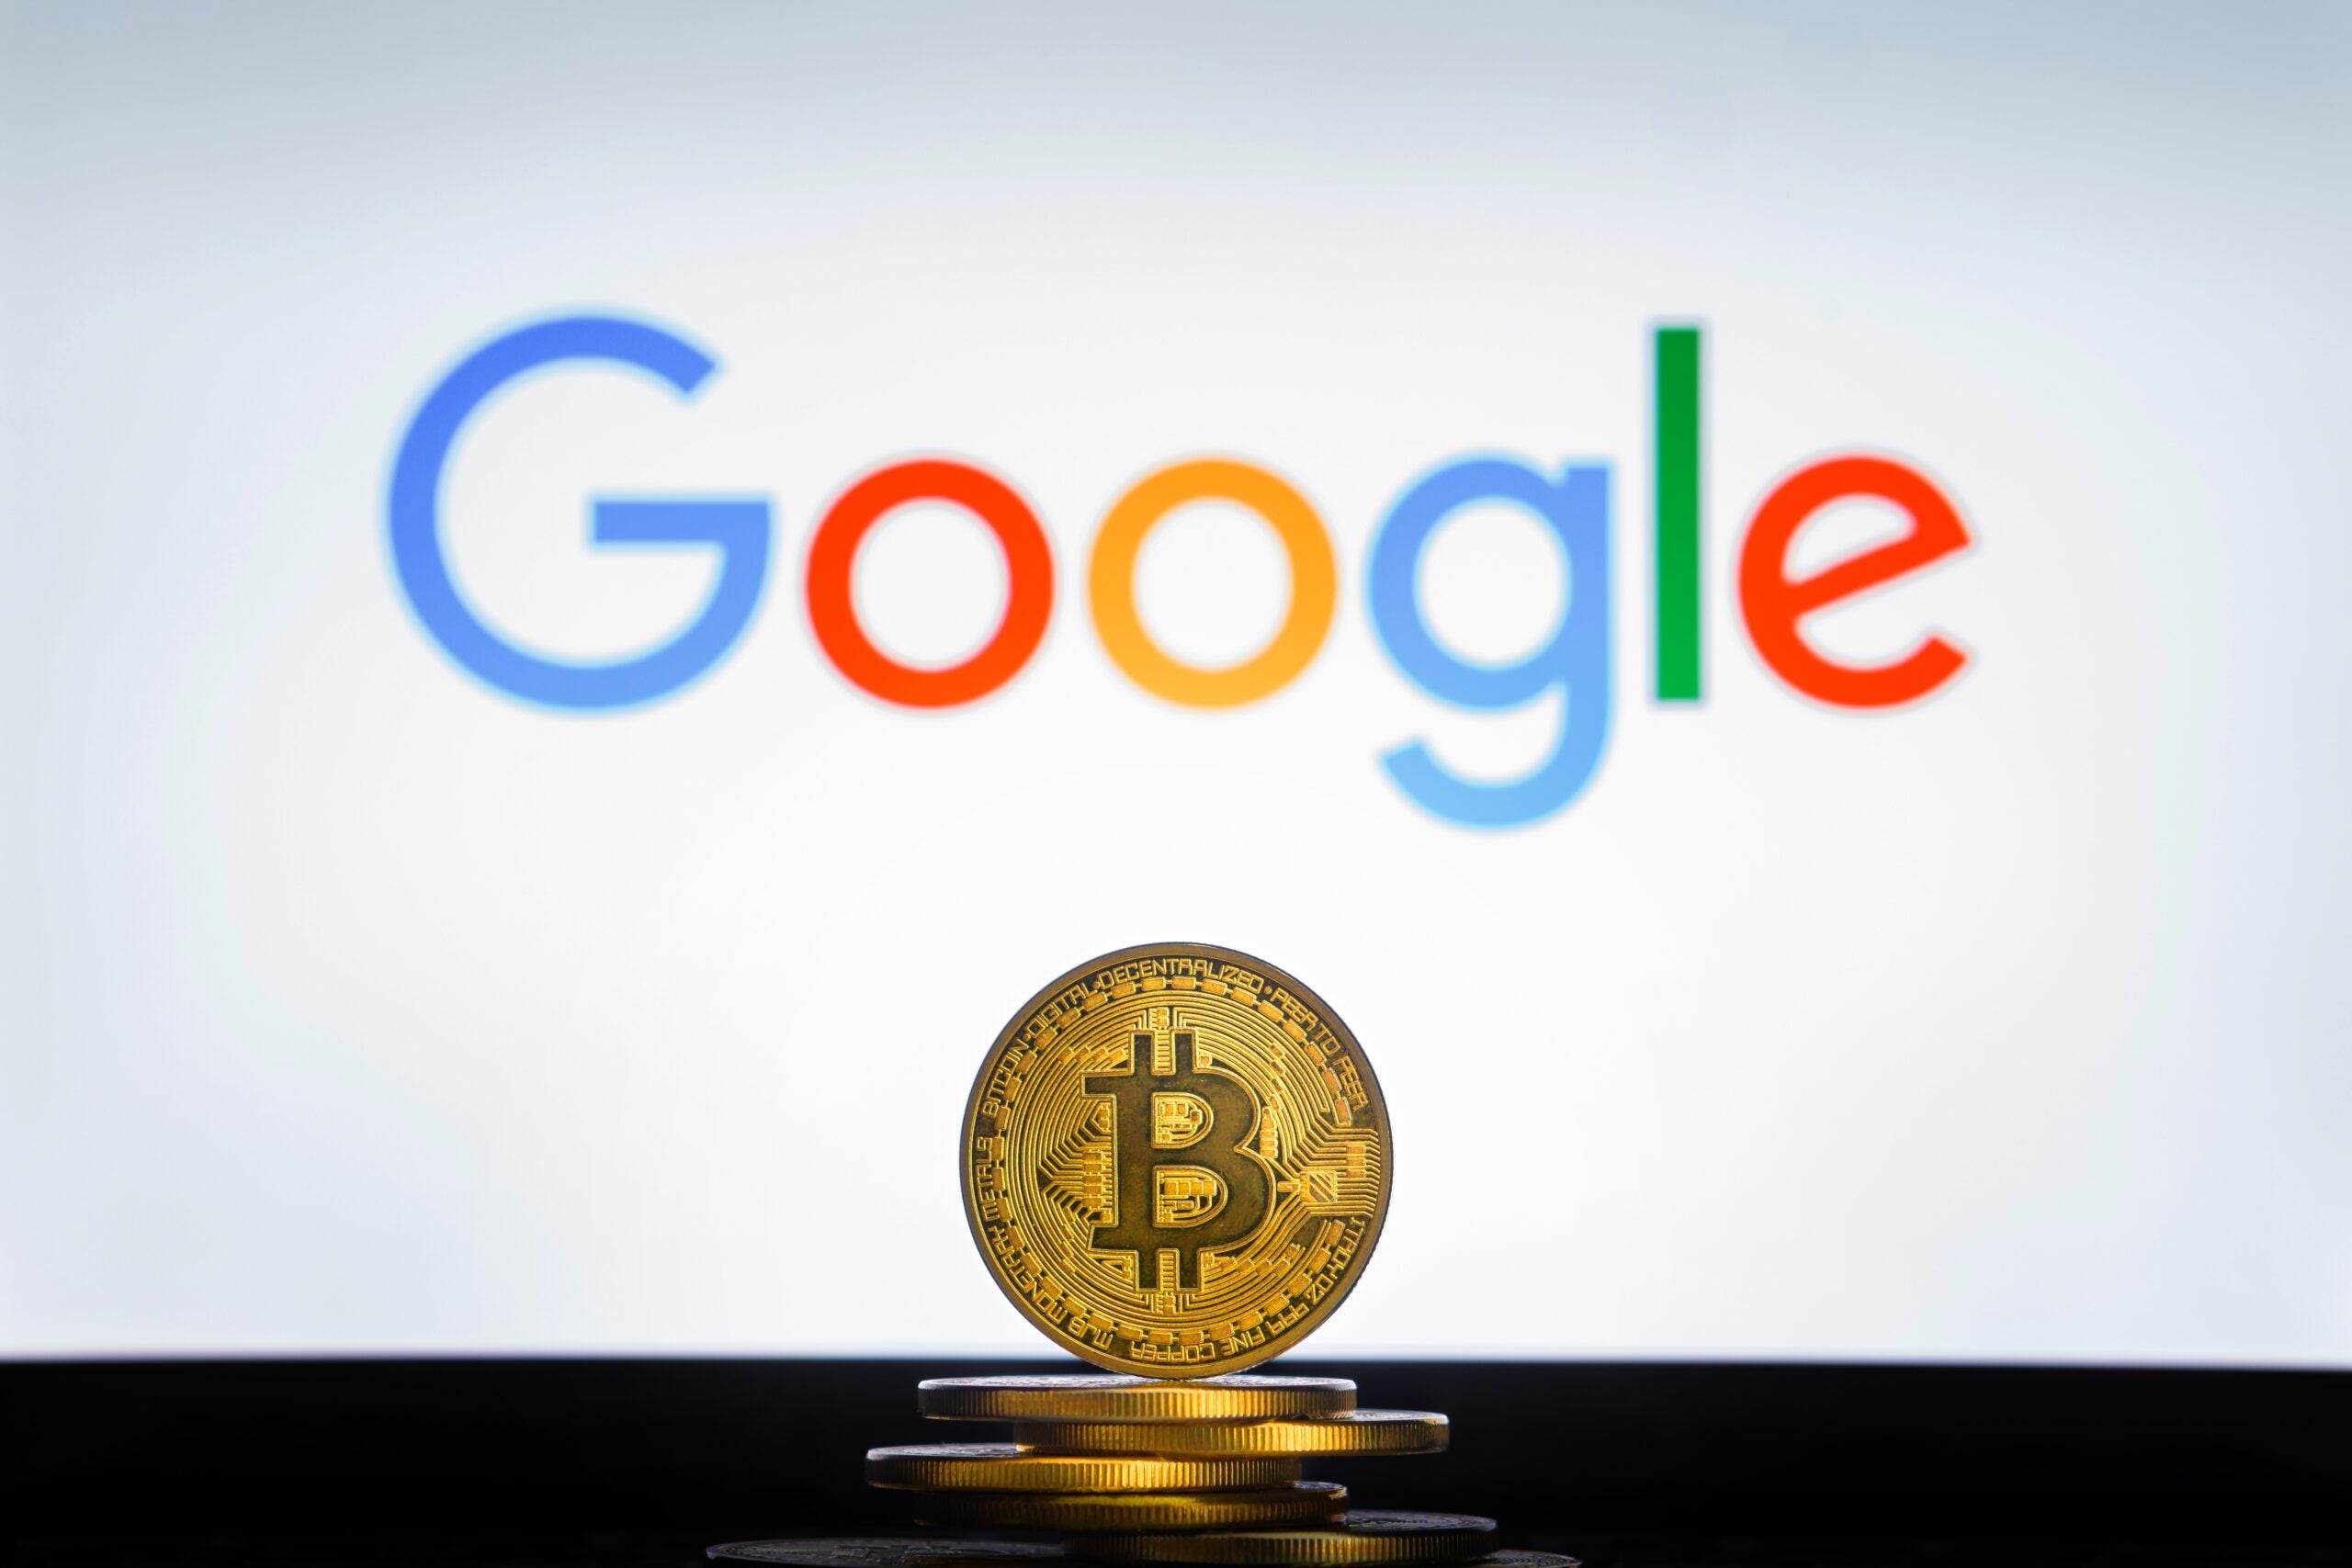 Google basis cryptocurrency crypto coin speculation